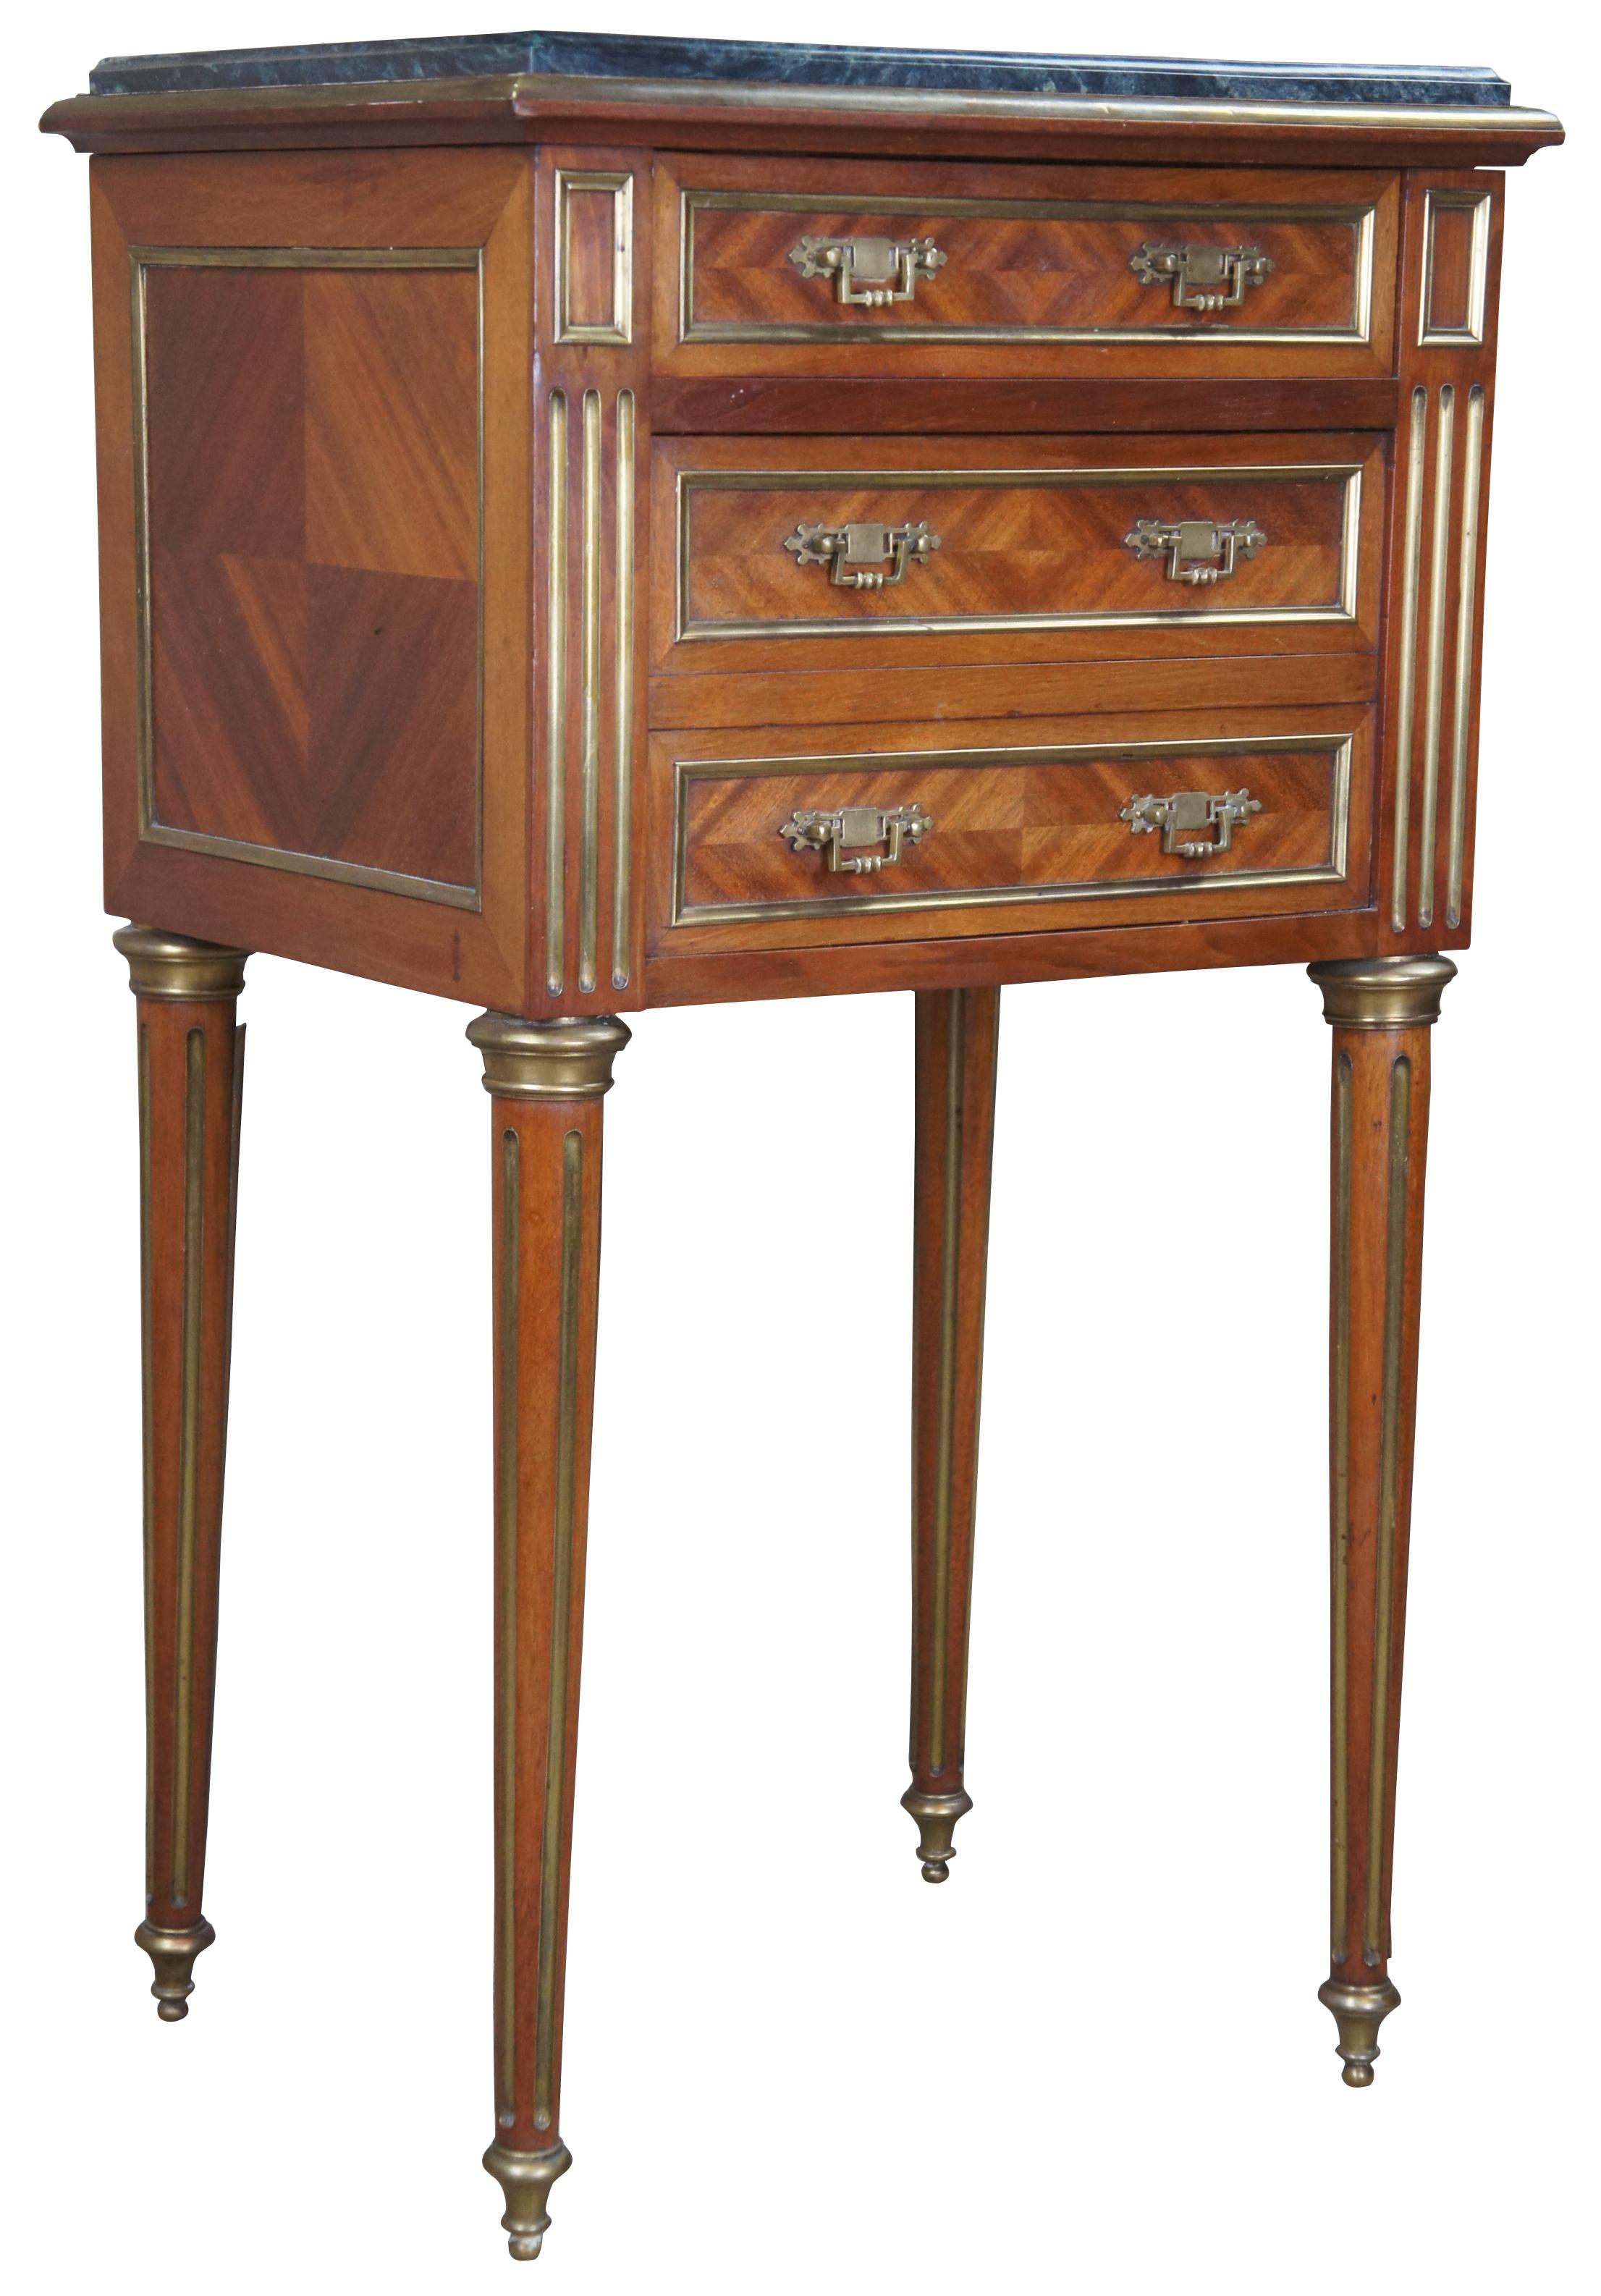 Antique 19th century Louis XV French humidor or side table. Made of walnut with matchbook parquetry veneer featuring brass inlaid accents and hardware, green marble top and tapered fluted legs. Interior humior compartment is lined with white marble